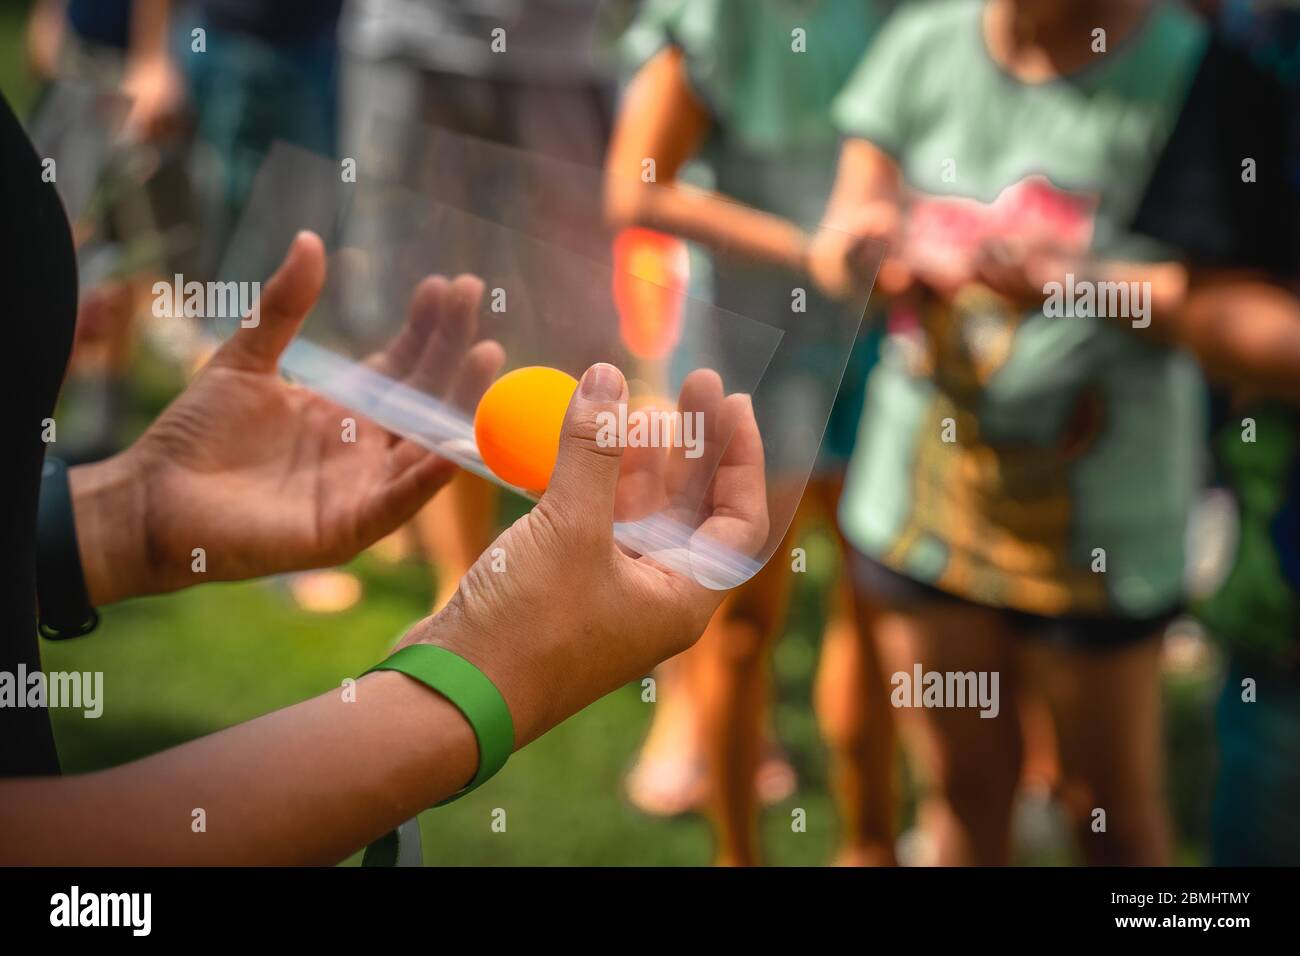 Excellent at accommodating imagery related to ping pong balls, summer games, competitive and group games for kids, creative ideas for free time activi Stock Photo